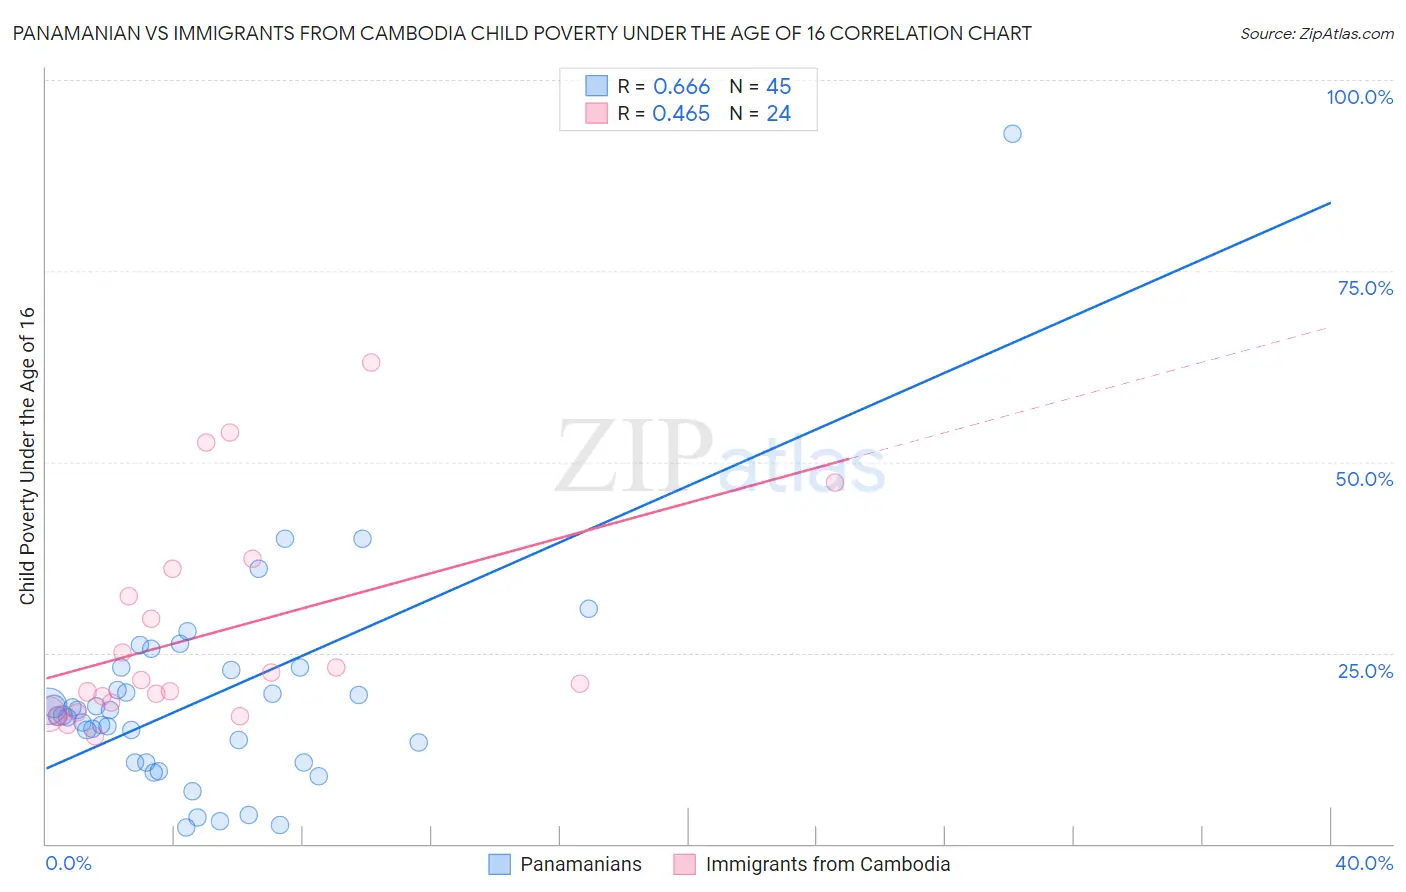 Panamanian vs Immigrants from Cambodia Child Poverty Under the Age of 16